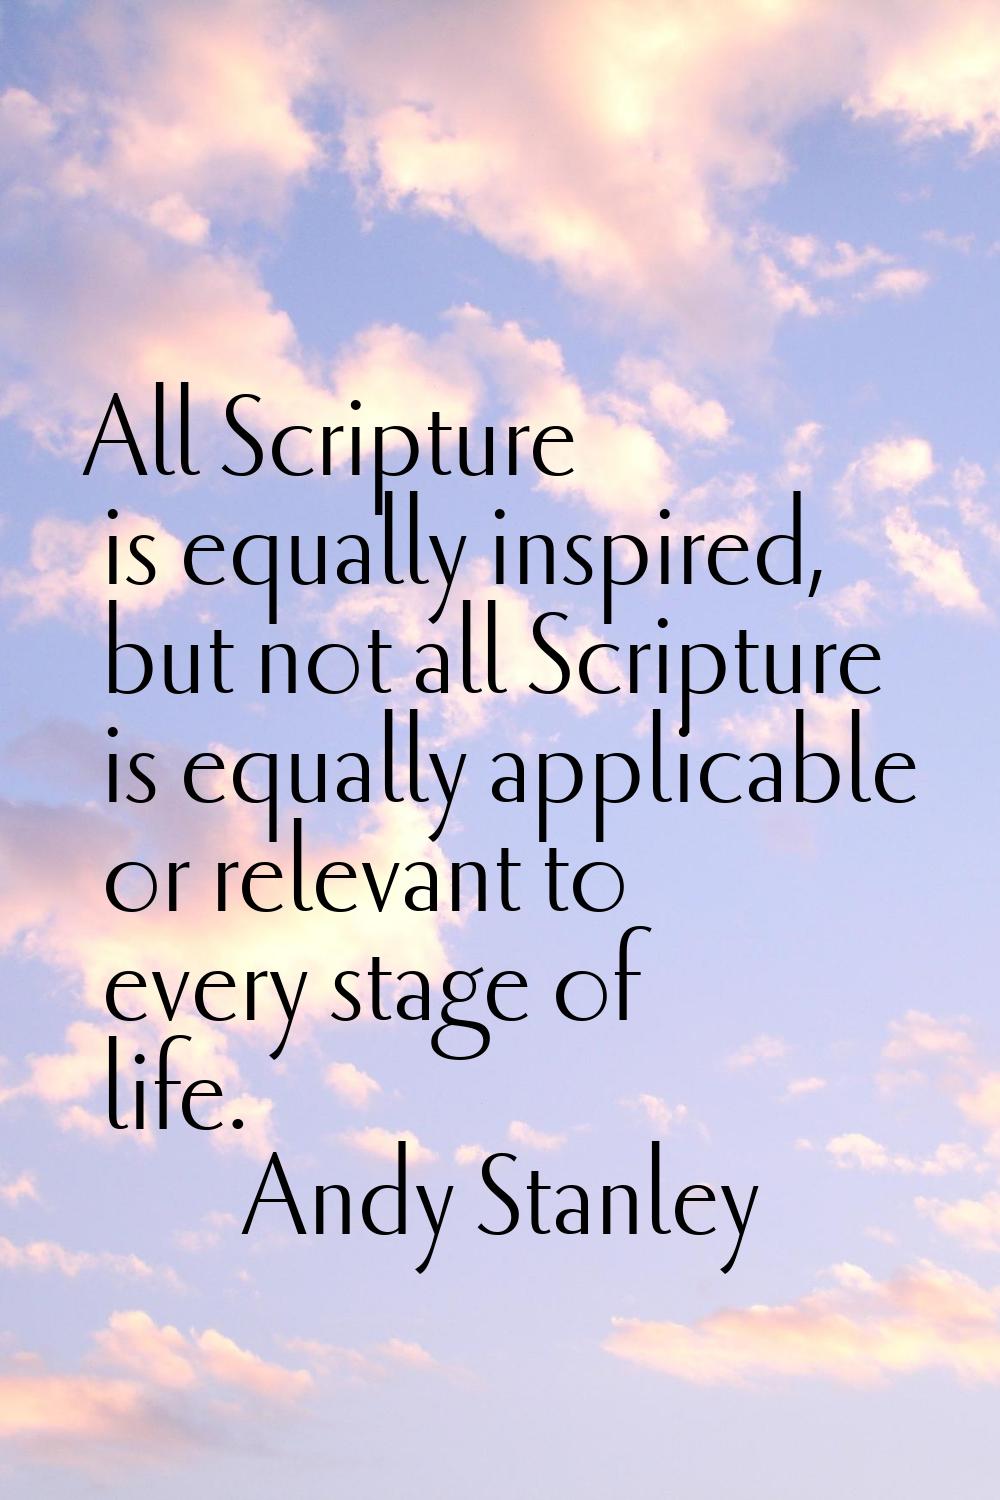 All Scripture is equally inspired, but not all Scripture is equally applicable or relevant to every